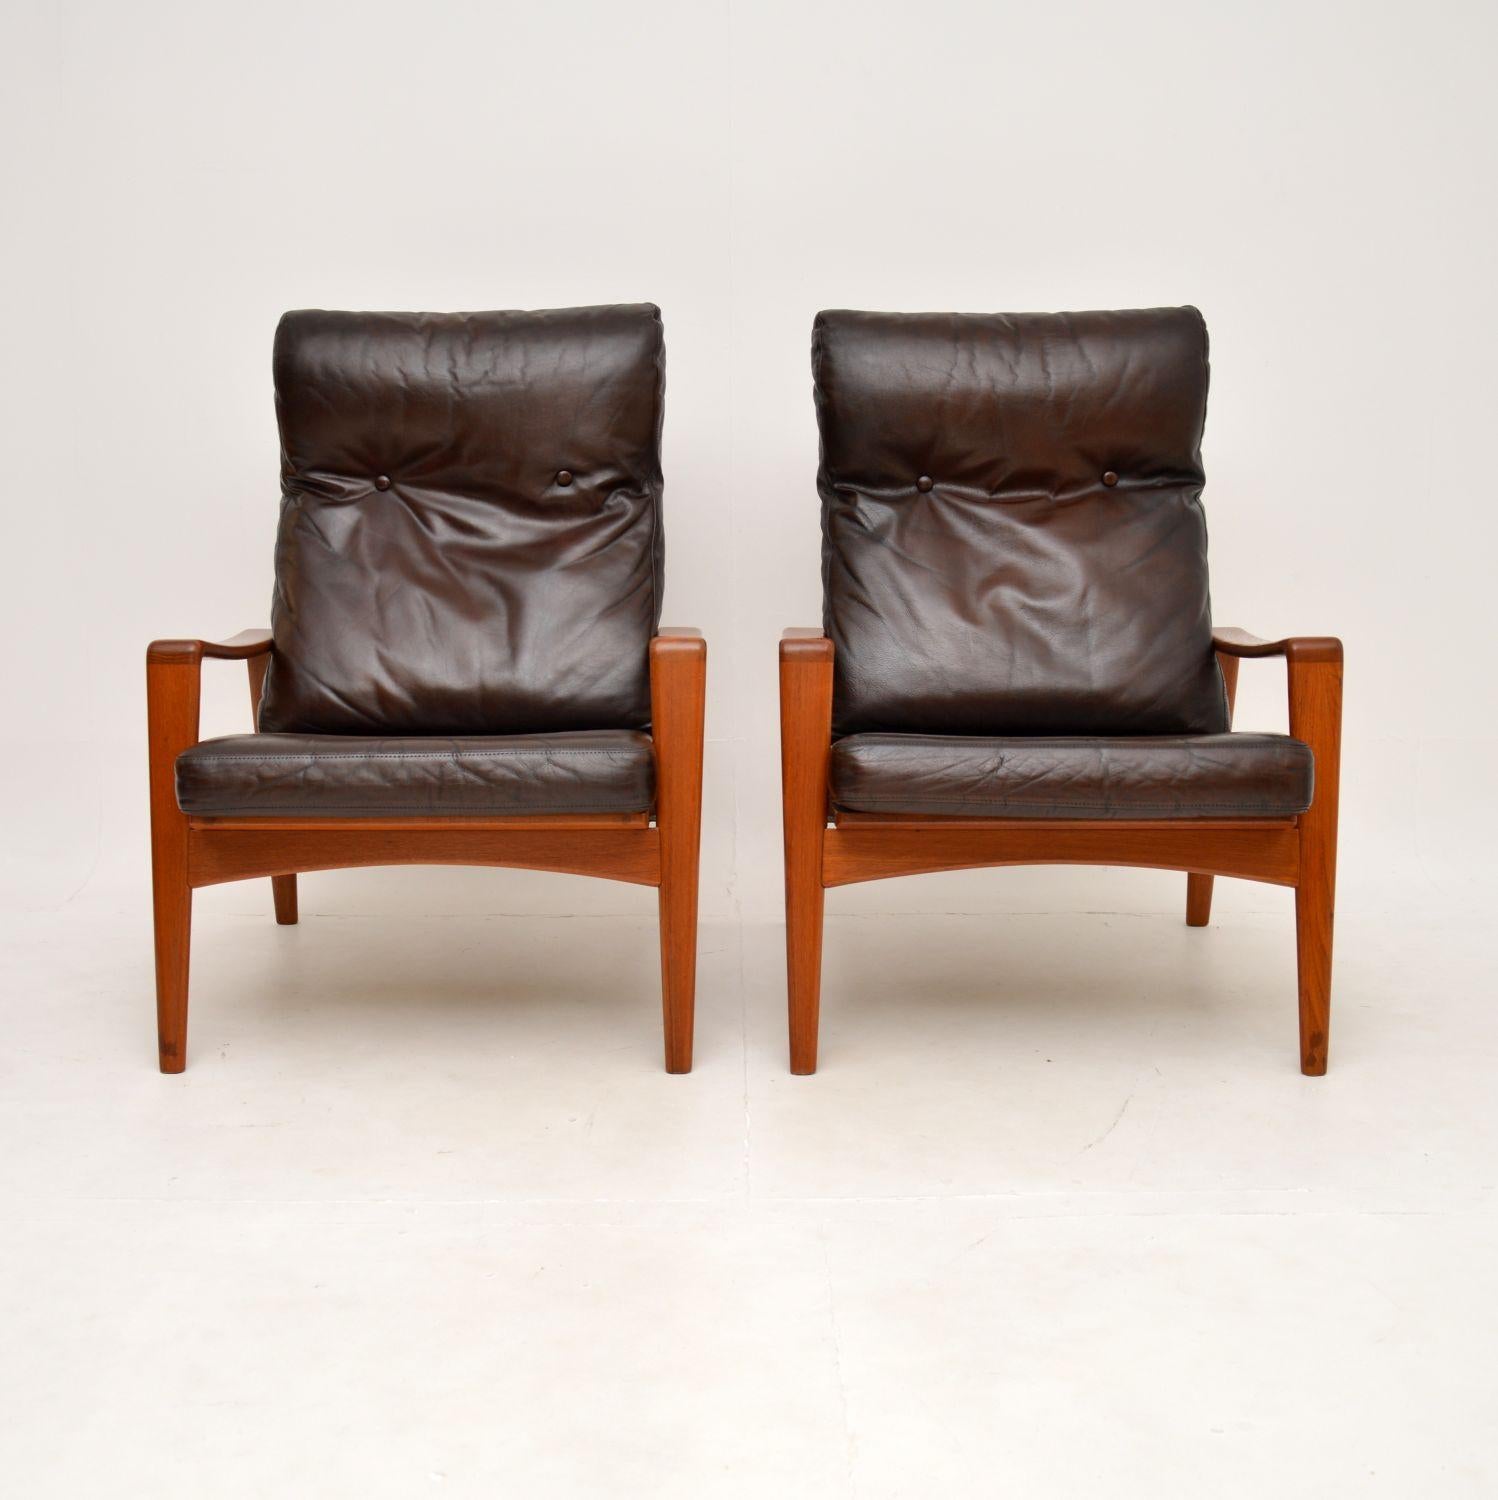 A stylish and extremely comfortable pair of Danish vintage teak and leather armchairs by Arne Wahl Iversen. They were made in Denmark by Komfort, they date from the 1960’s.

The quality is outstanding, they are beautifully designed with stunning